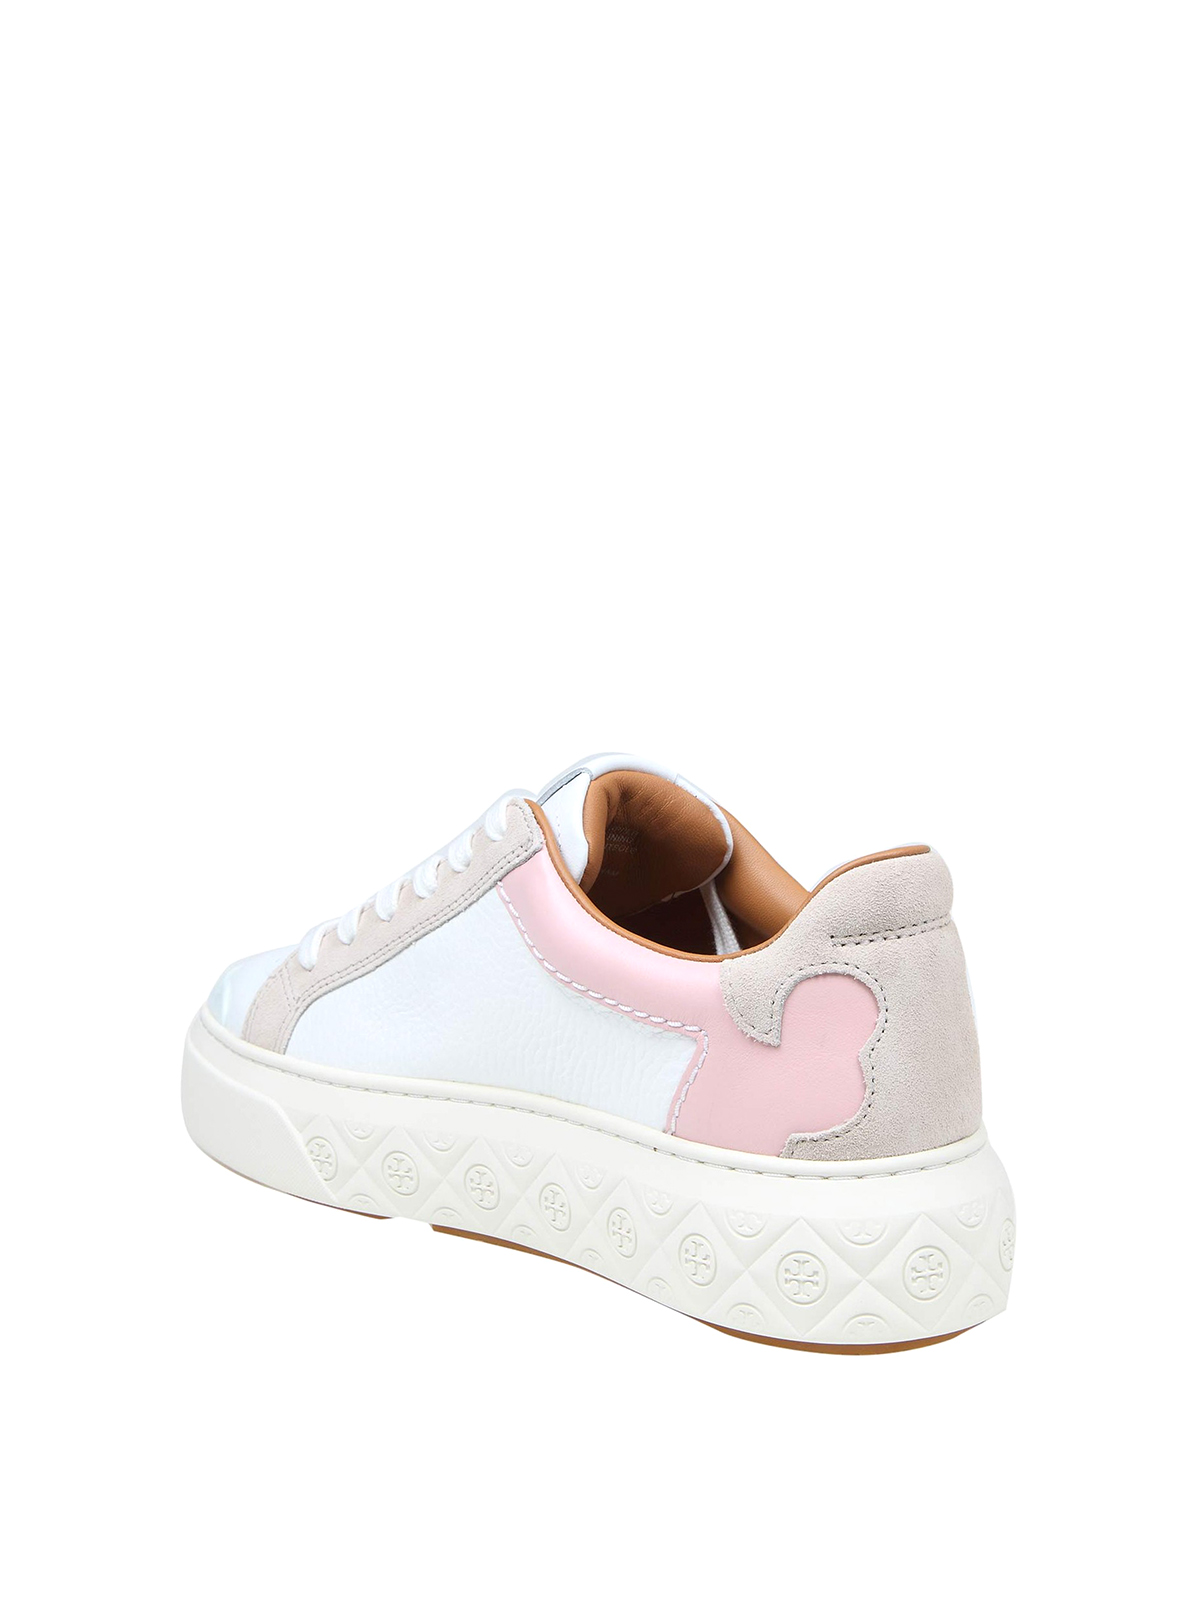 Trainers Tory Burch - Ladybug sneaker in white and pink leather - 143066650